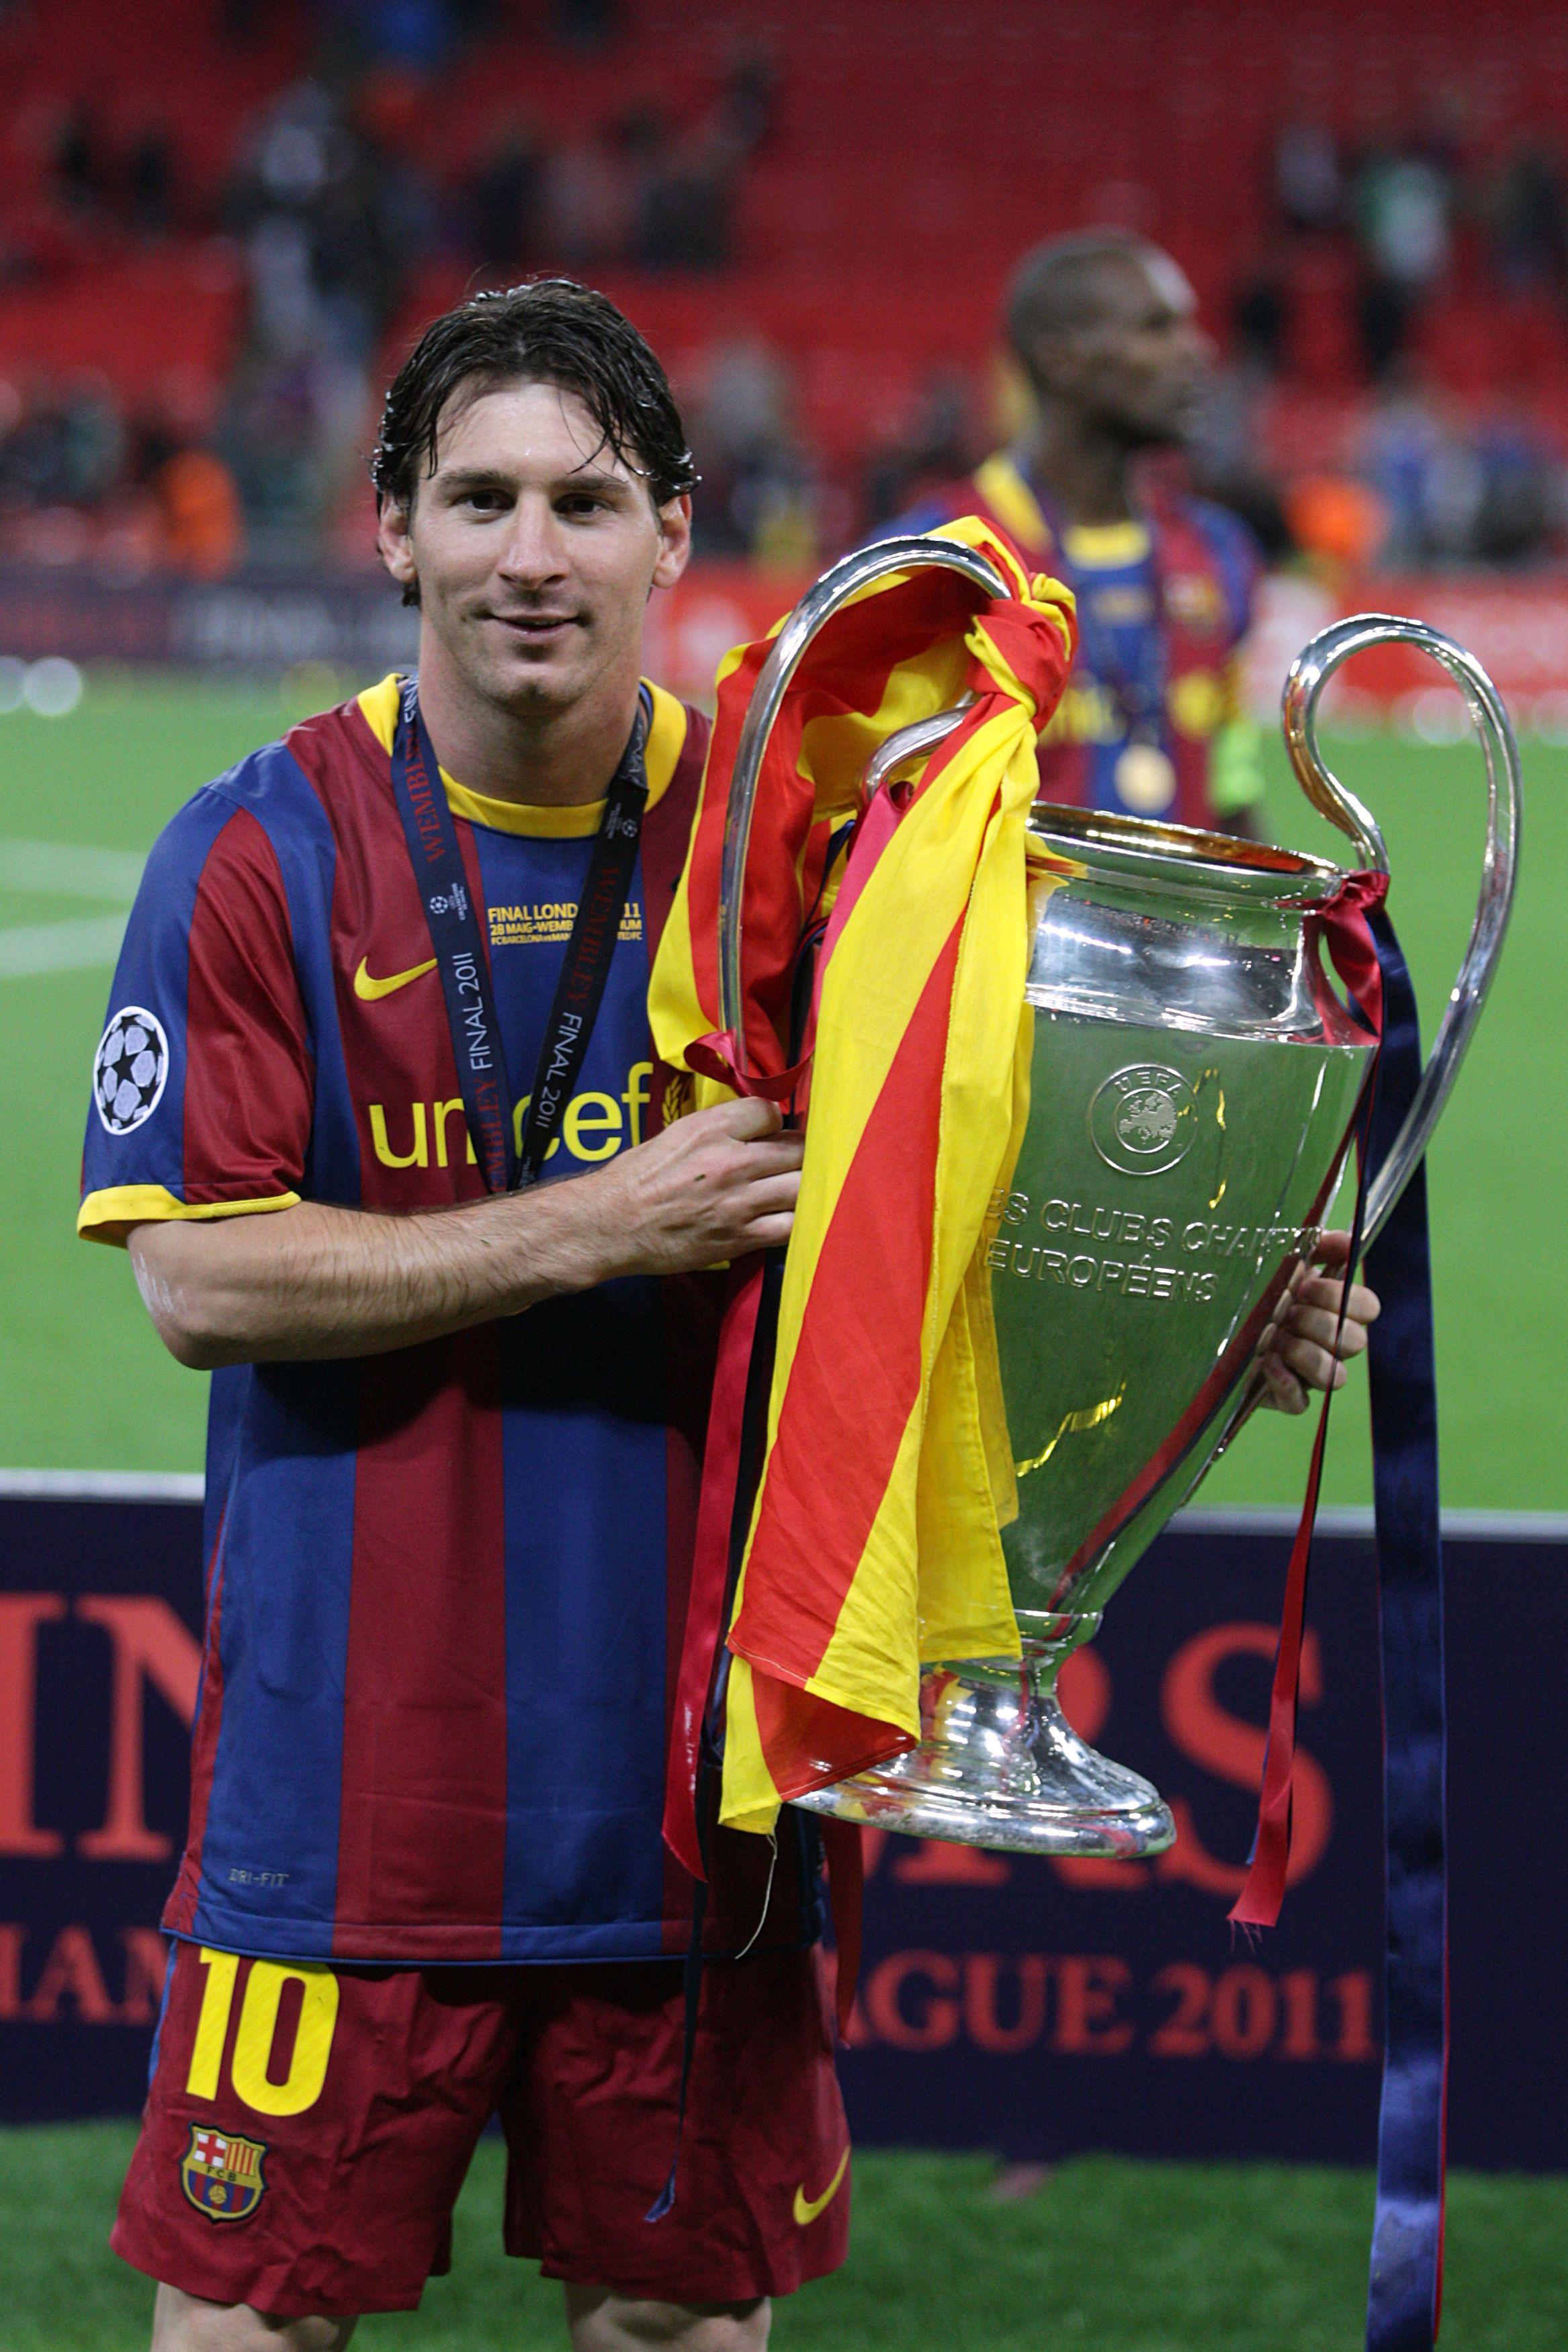 Lionel Messi with his third Champions League medal, won at Wembley in 2011